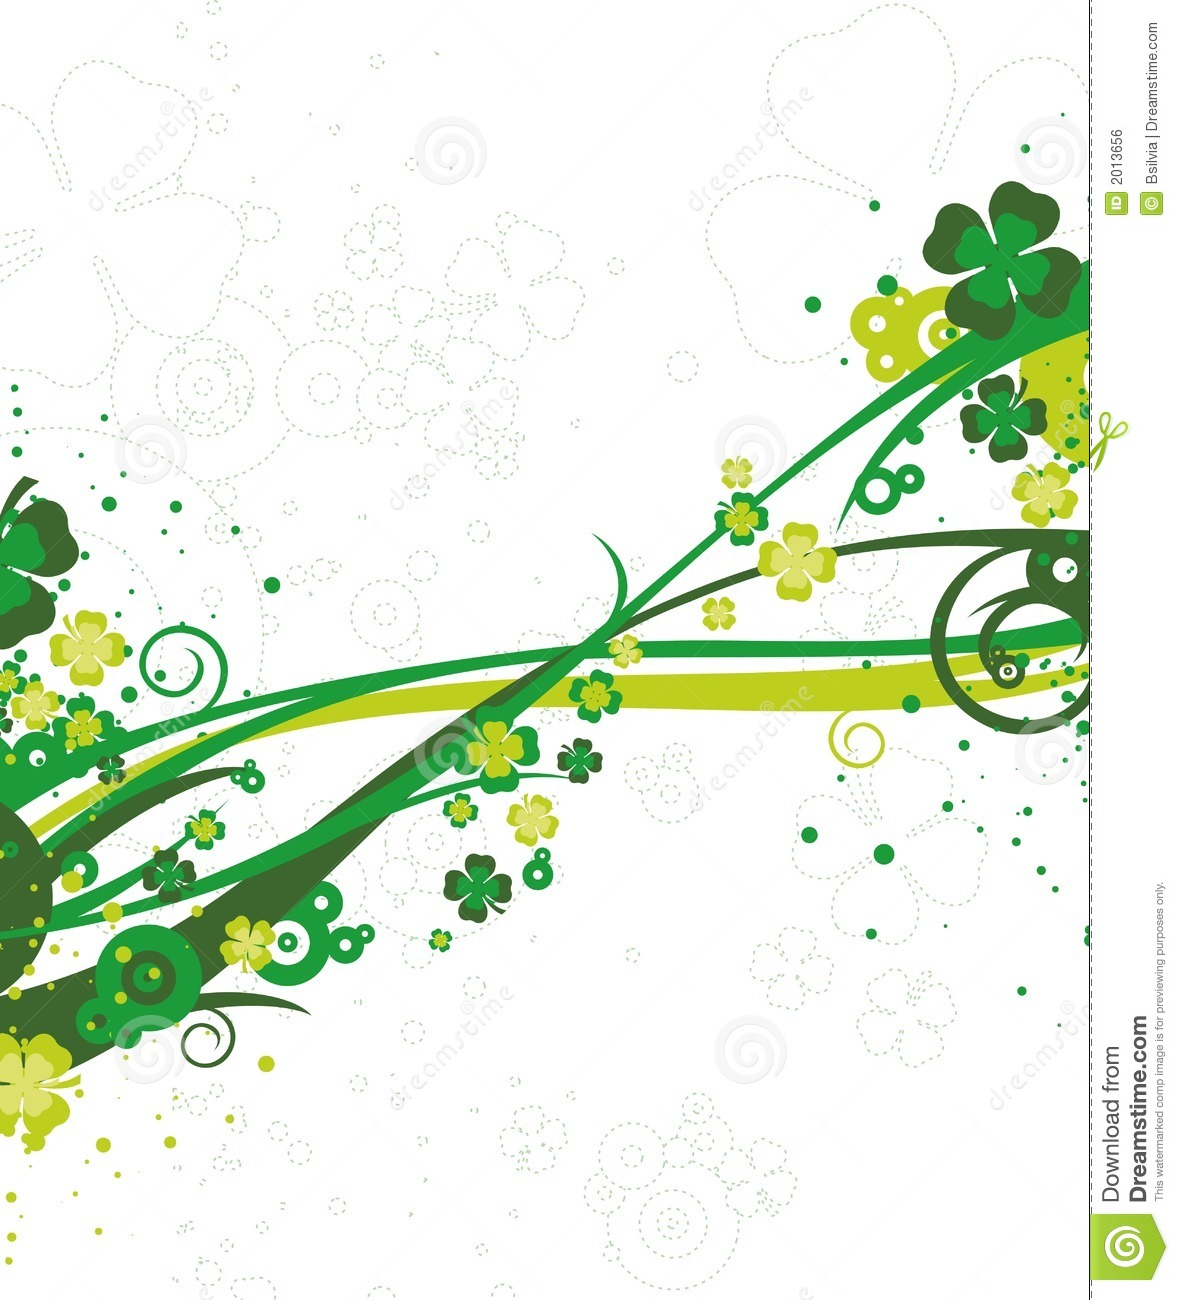 St  Patrick S Day Background Royalty Free Stock Image   Image  2013656